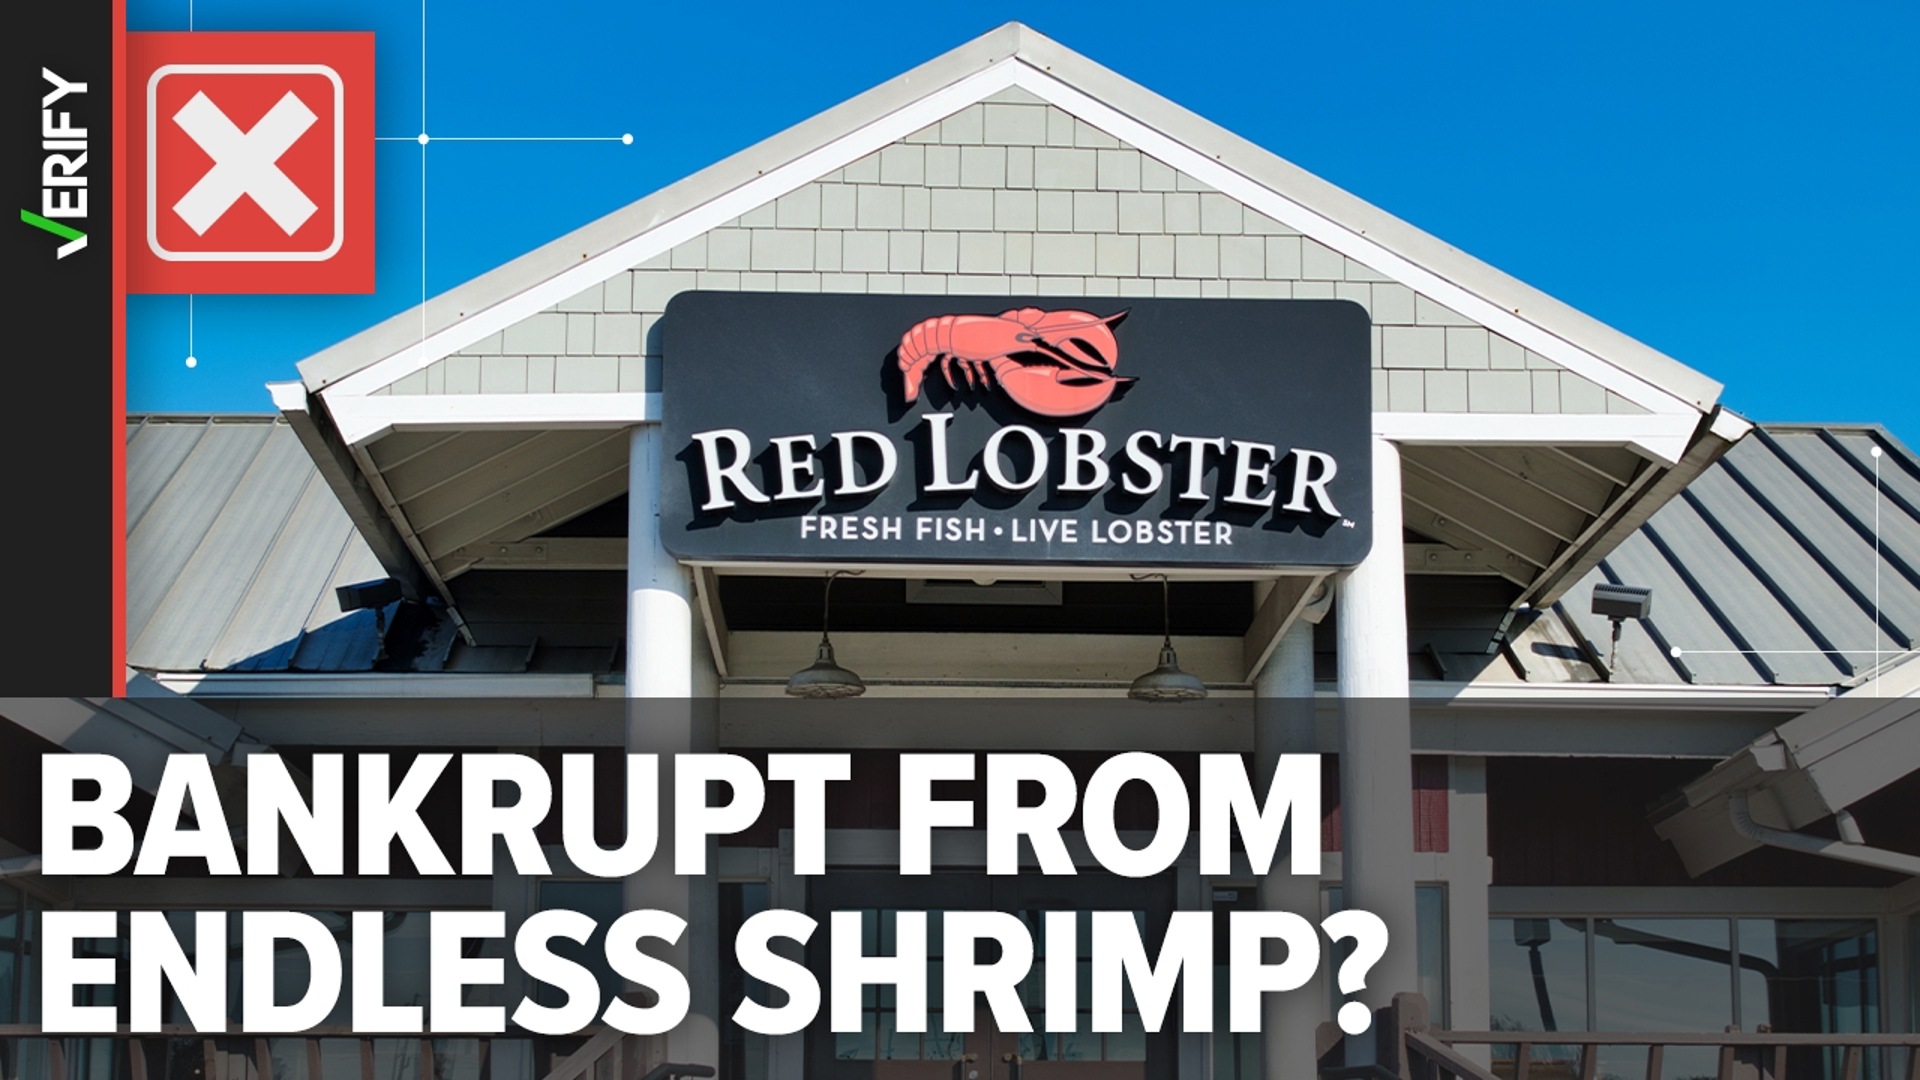 Endless shrimp is not main cause of Red Lobster bankruptcy